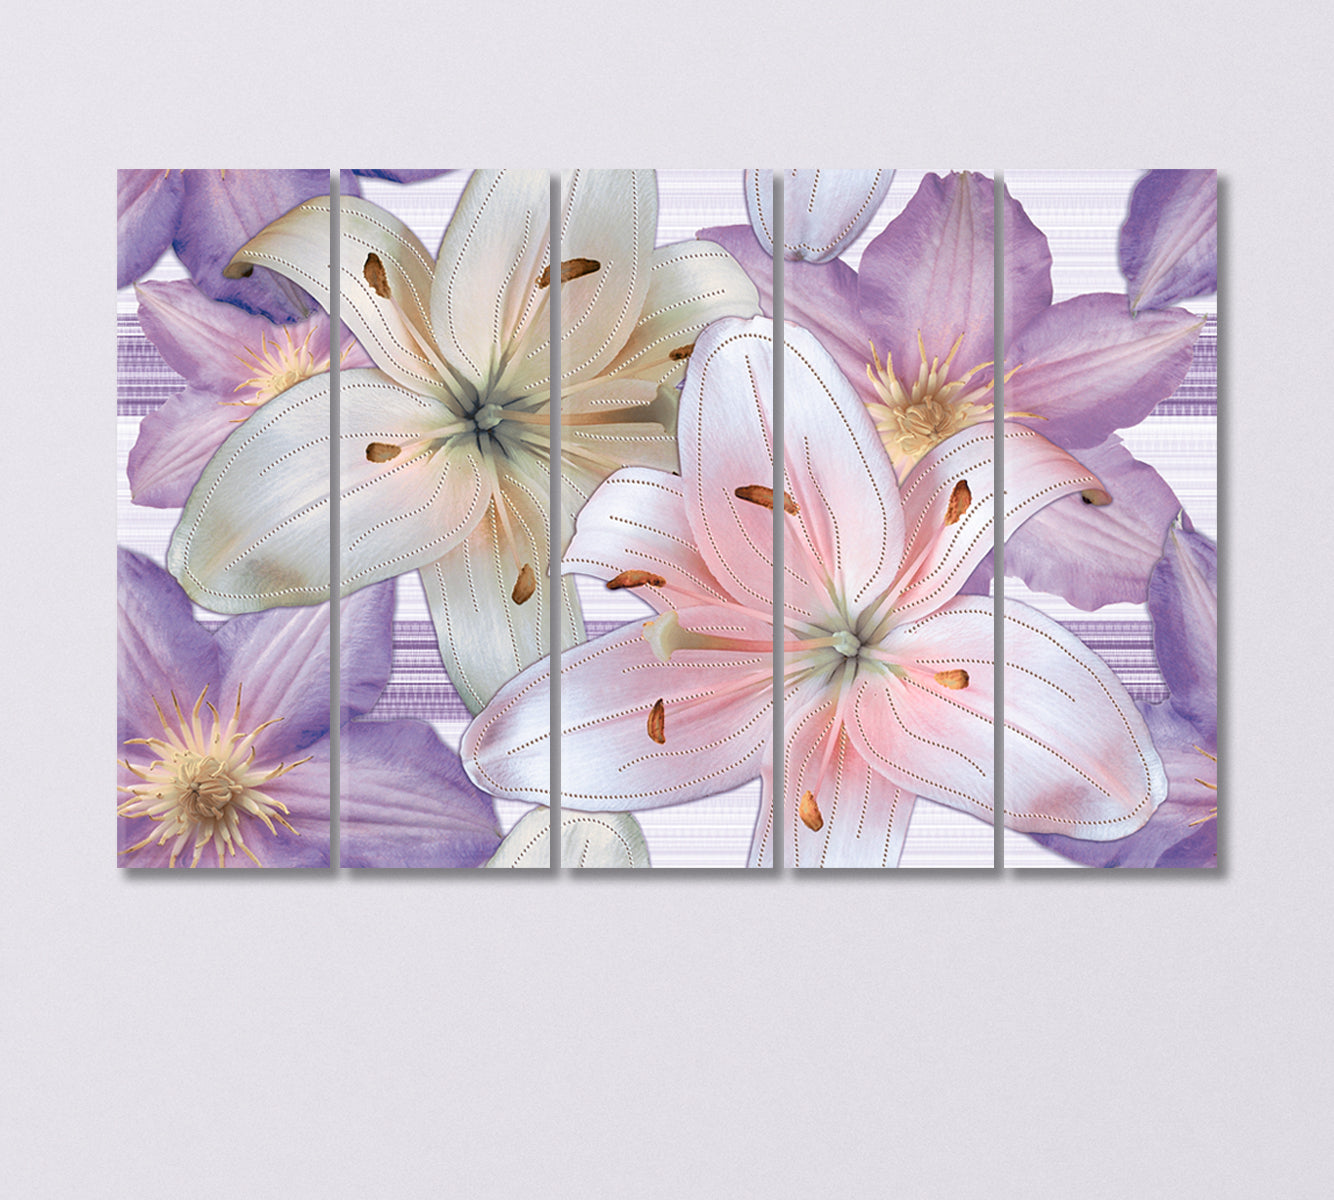 Abstract Lily Flowers Canvas Print-Canvas Print-CetArt-5 Panels-36x24 inches-CetArt